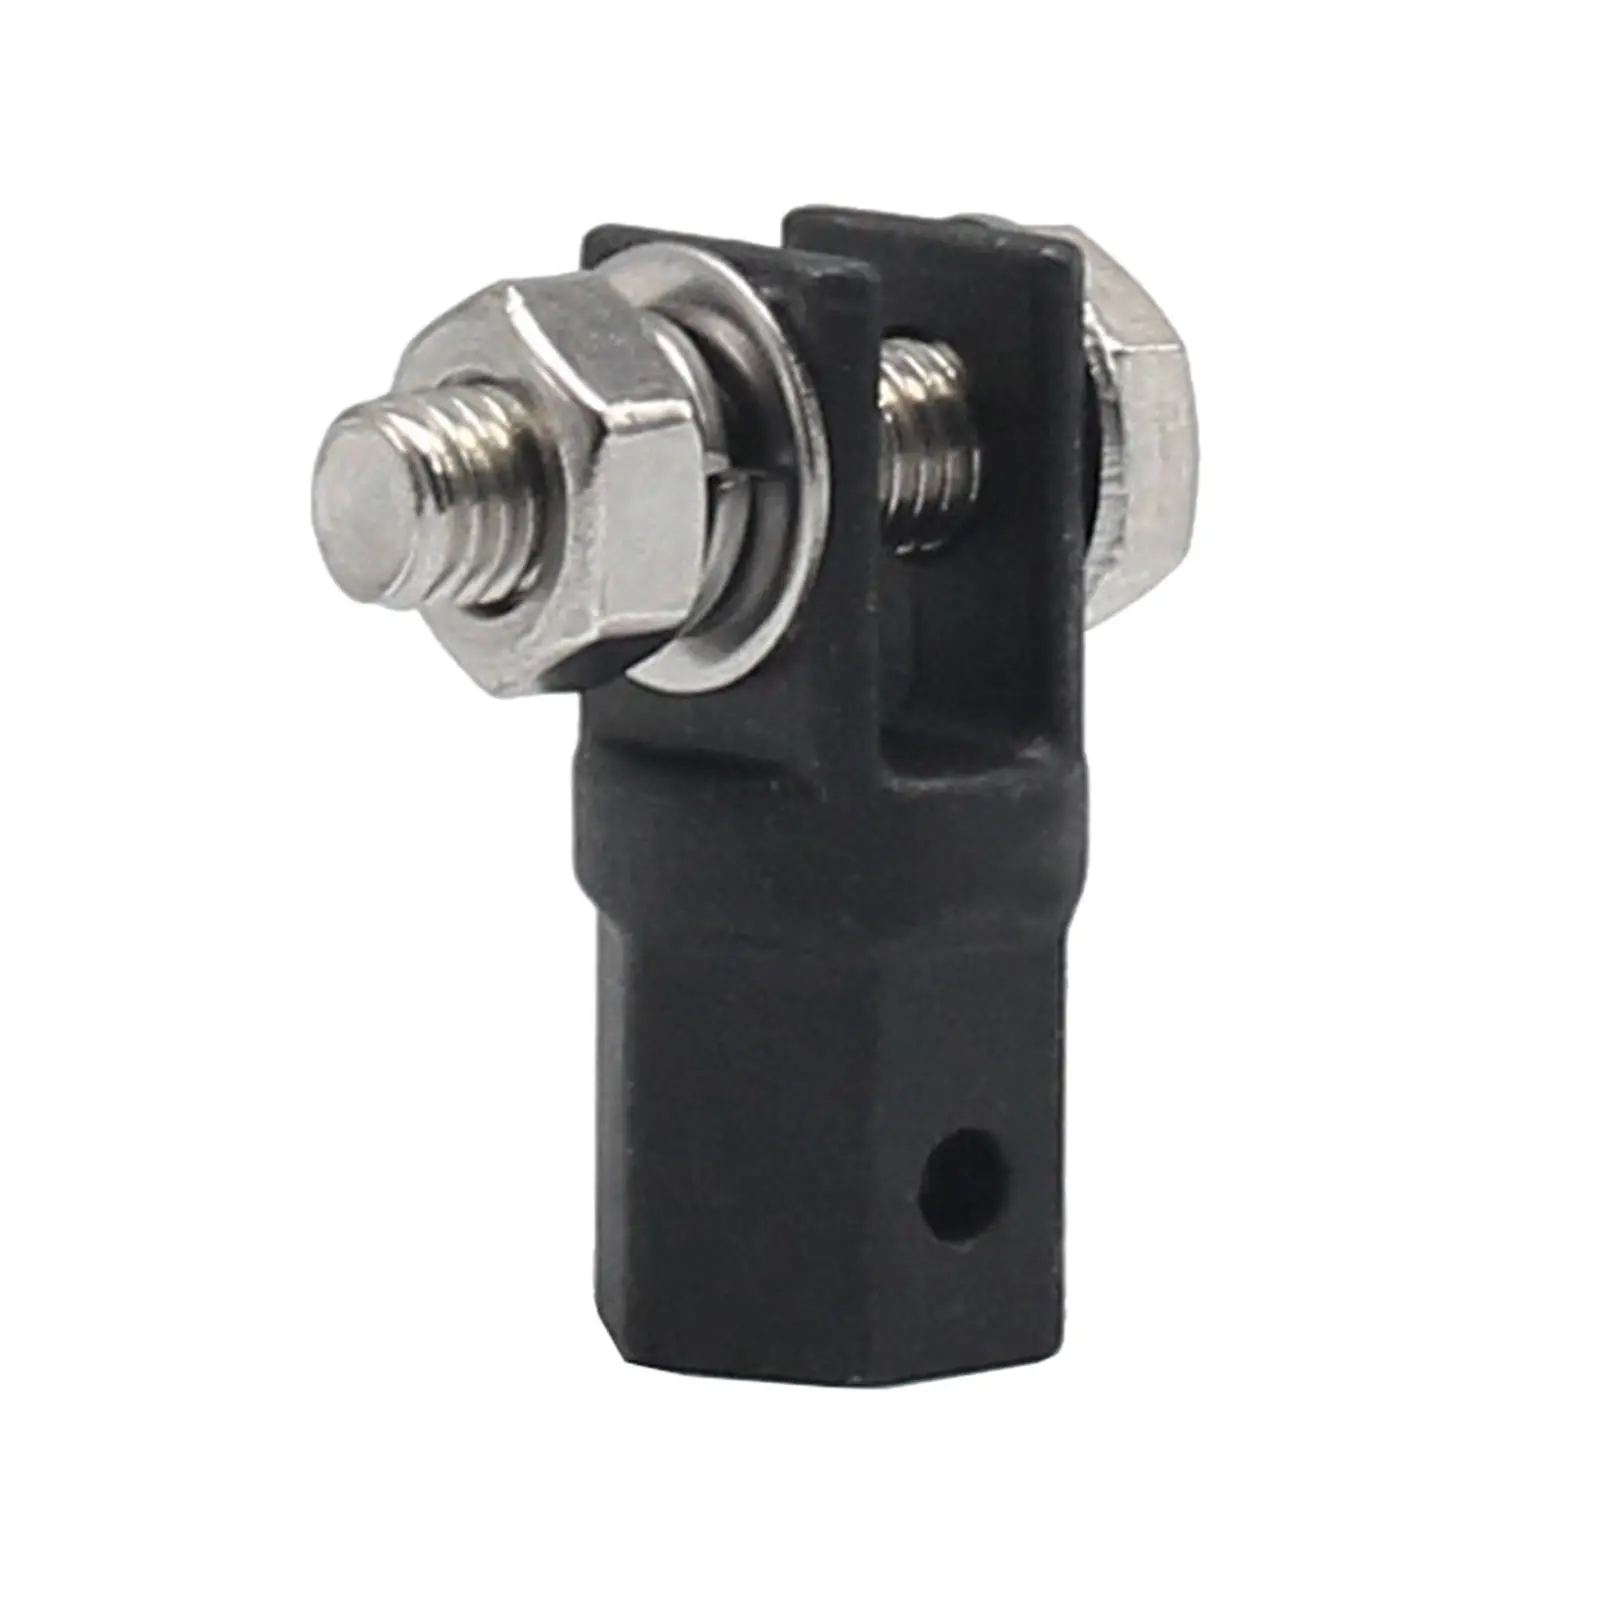 Scissor Jack Adaptor 1/2'' for Use with 1/2 Inch Drive or Impact Wrench Tools